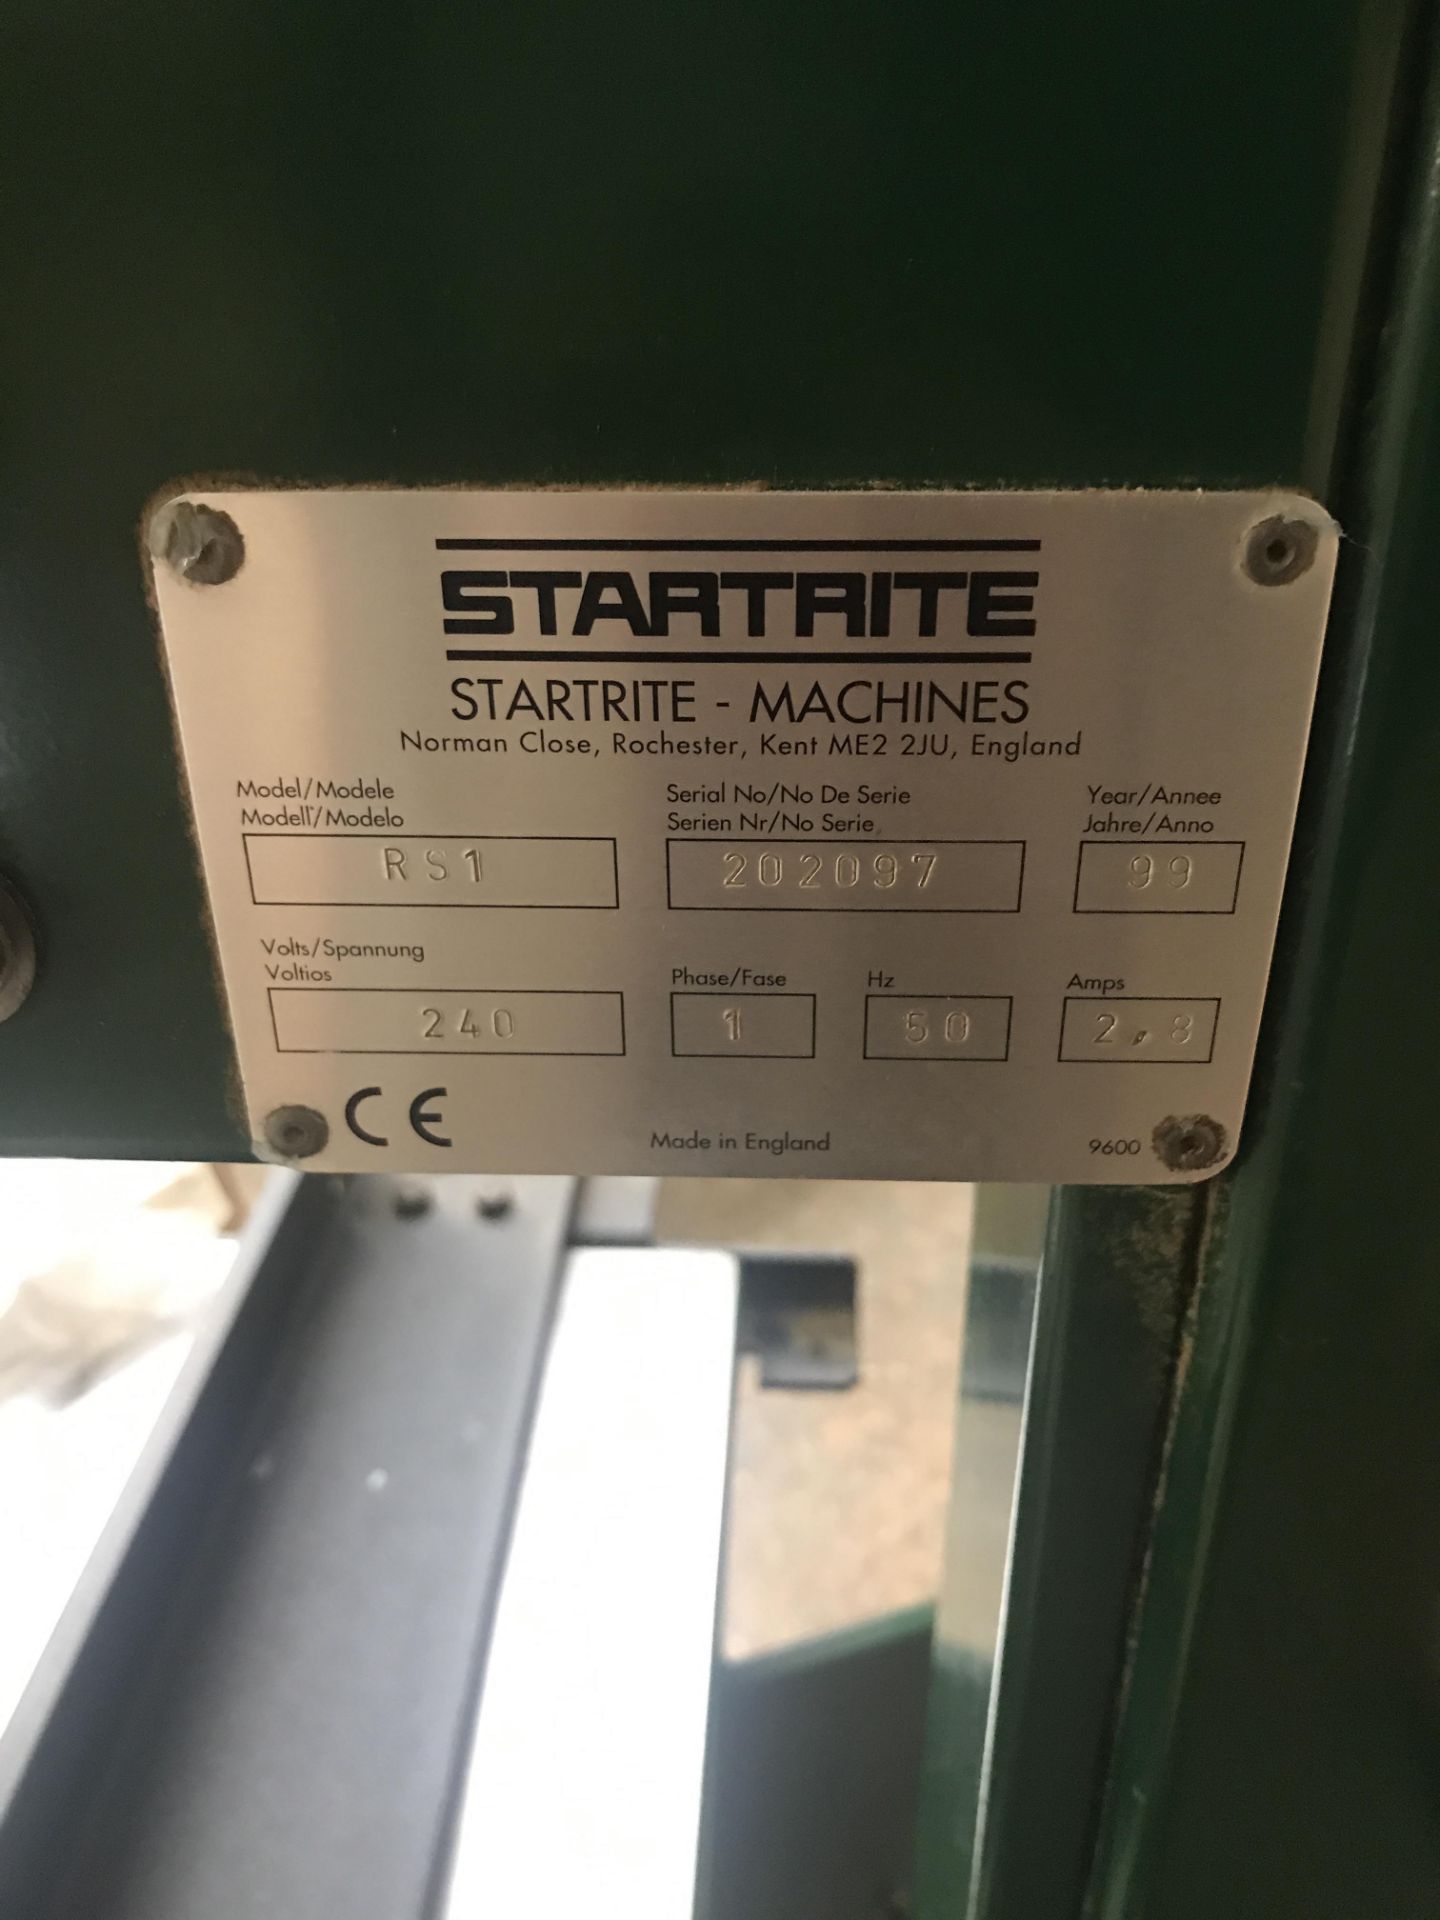 Startrite R51 Vertical Bandsaw, serial no. 202097, year of manufacture 1999, single phase, with - Bild 4 aus 9